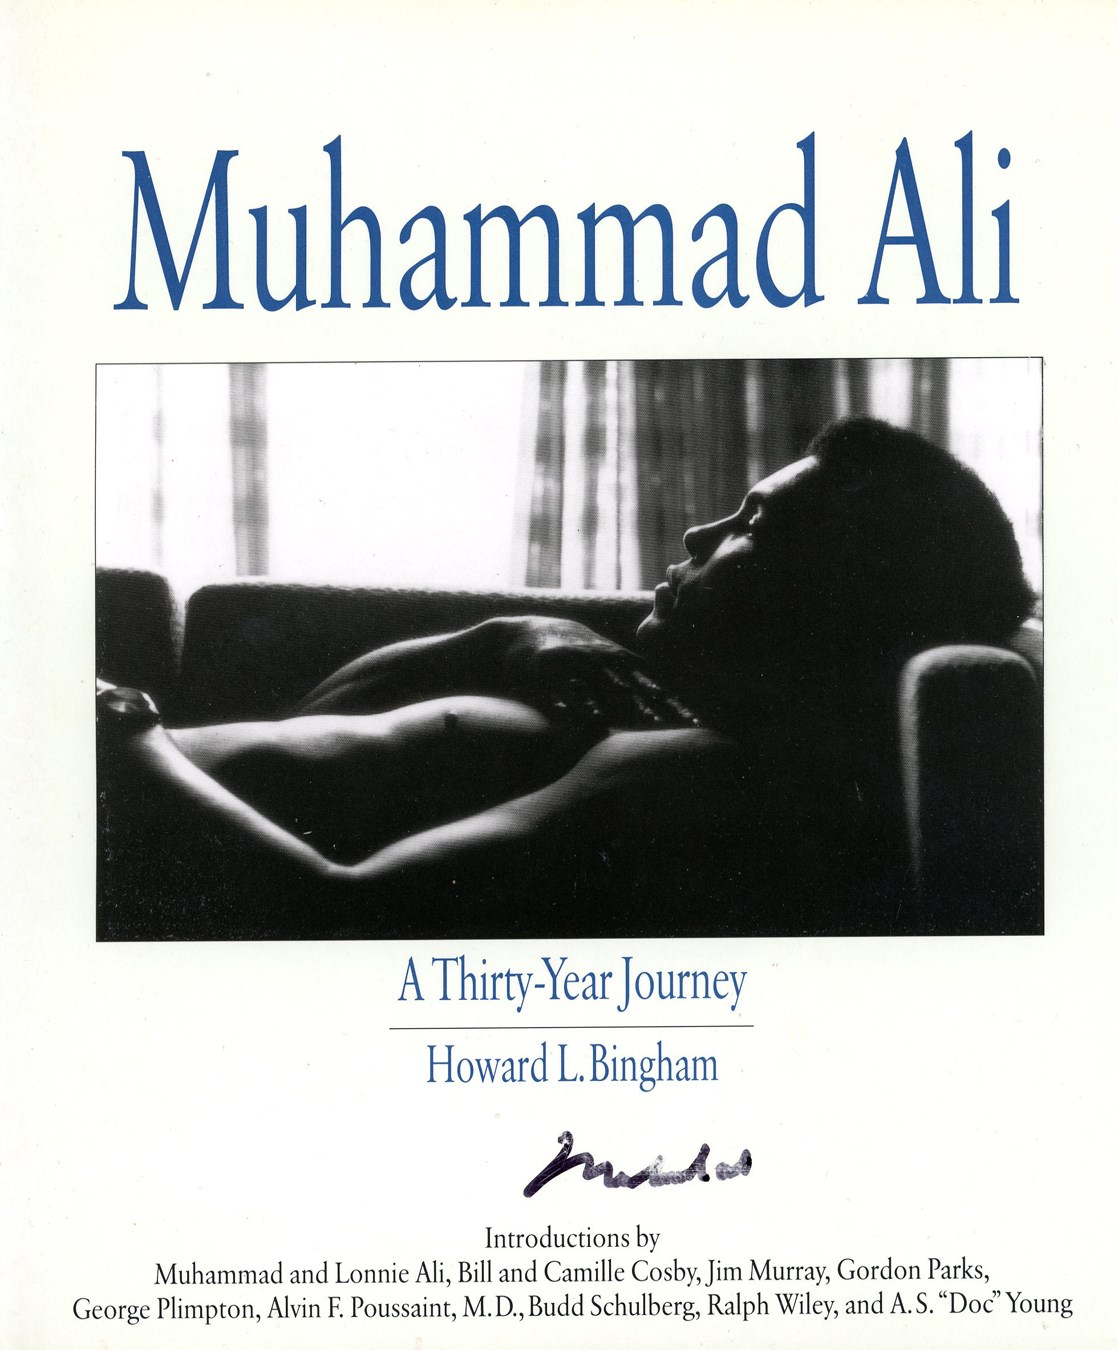 - 1993 "Muhammad Ali: A Thirty Year Journey" Book - Signed by Ali 8 Times (PSA/DNA)